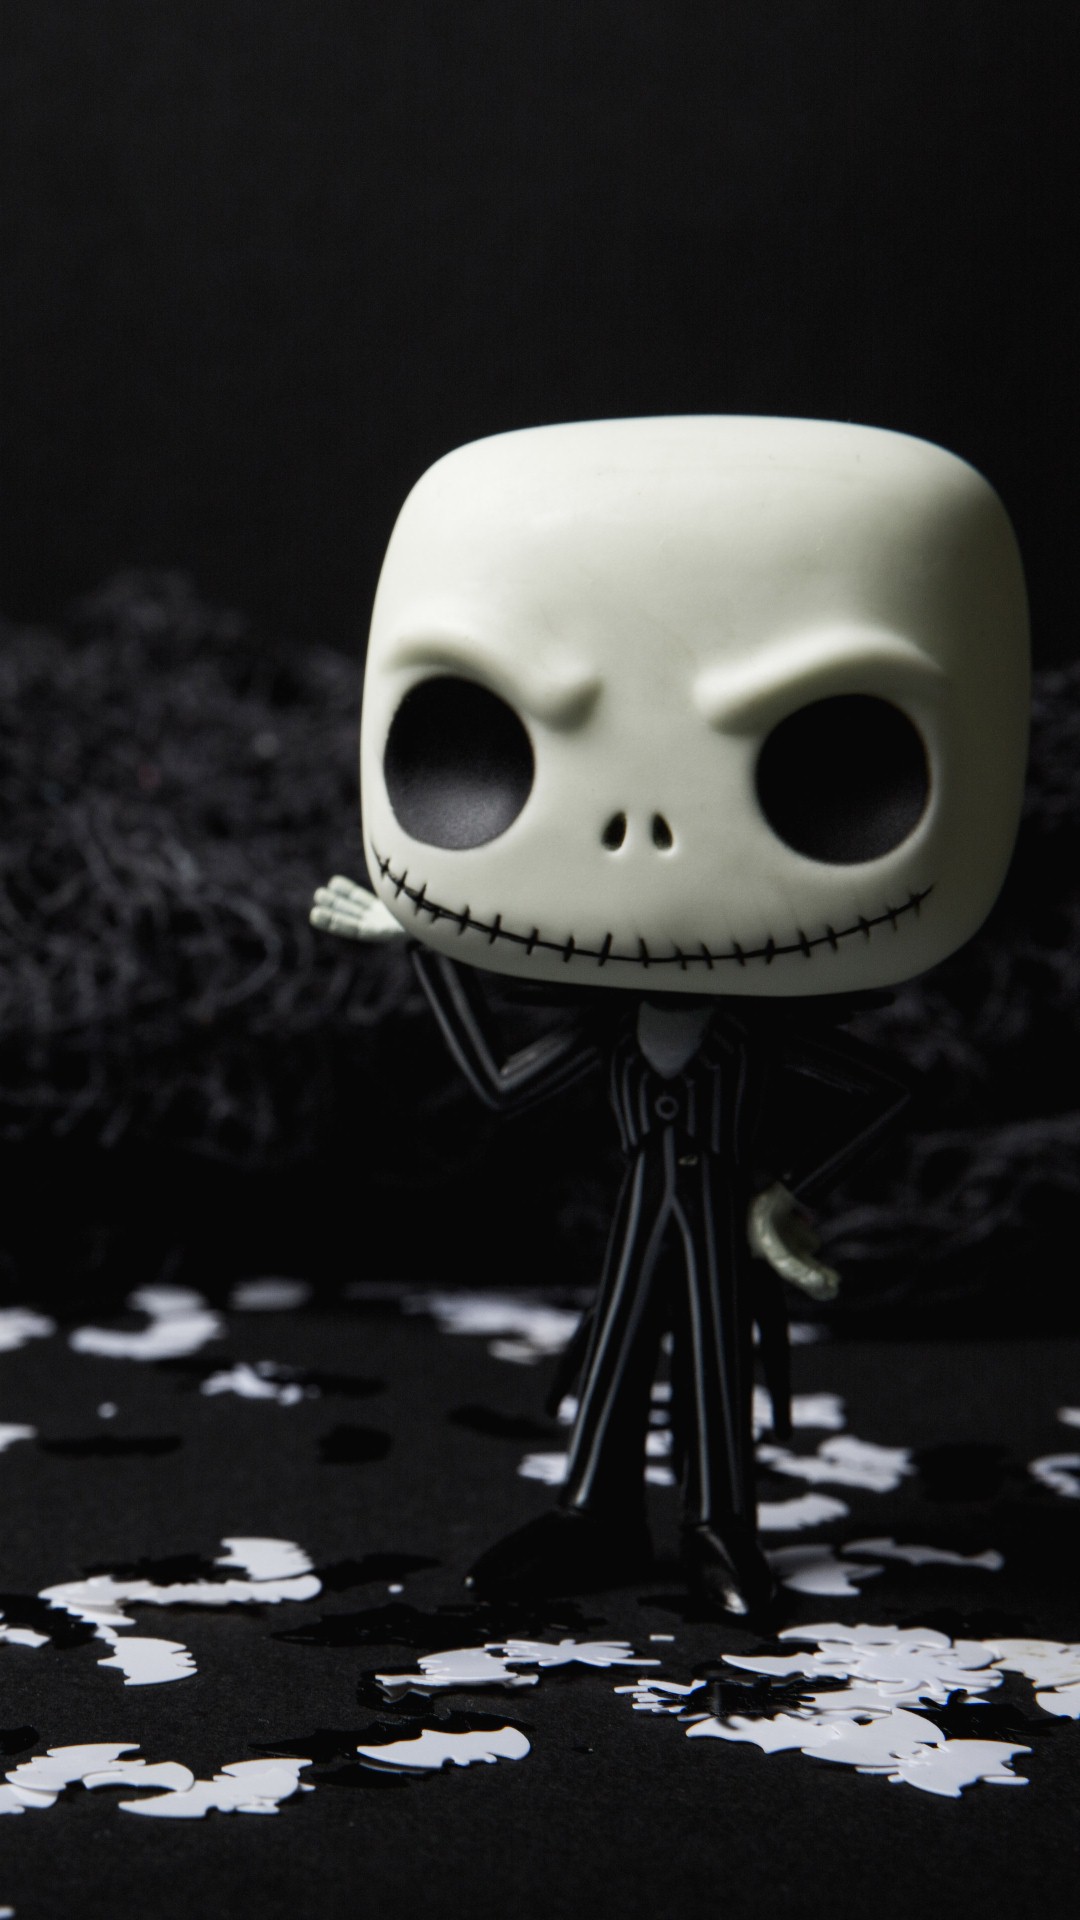 cool photos for wallpaper,head,animation,skull,black and white